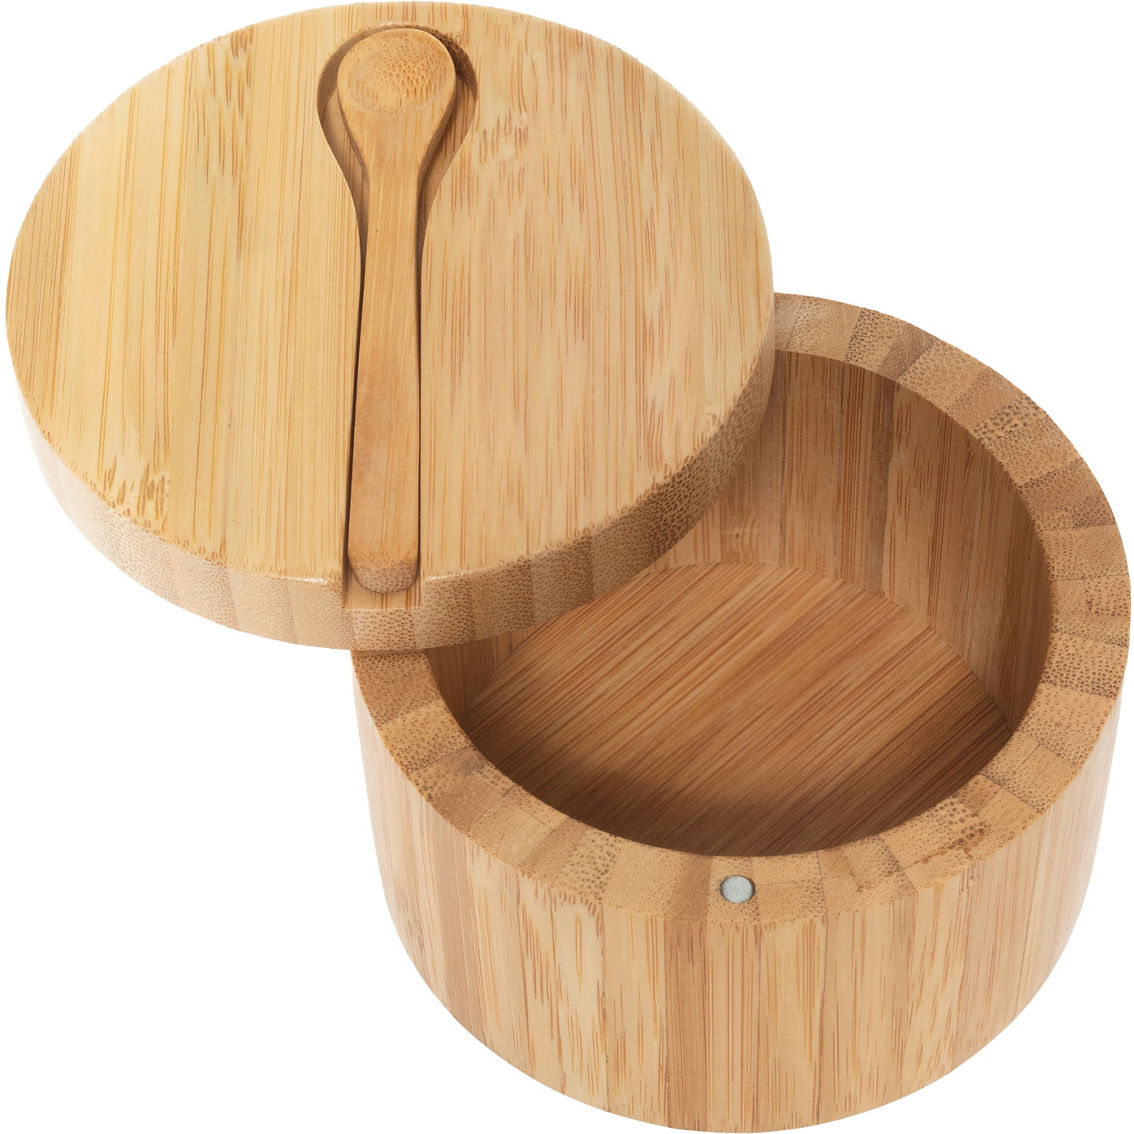 Lipper Bamboo Salt Box with Spoon - Image 2 of 4